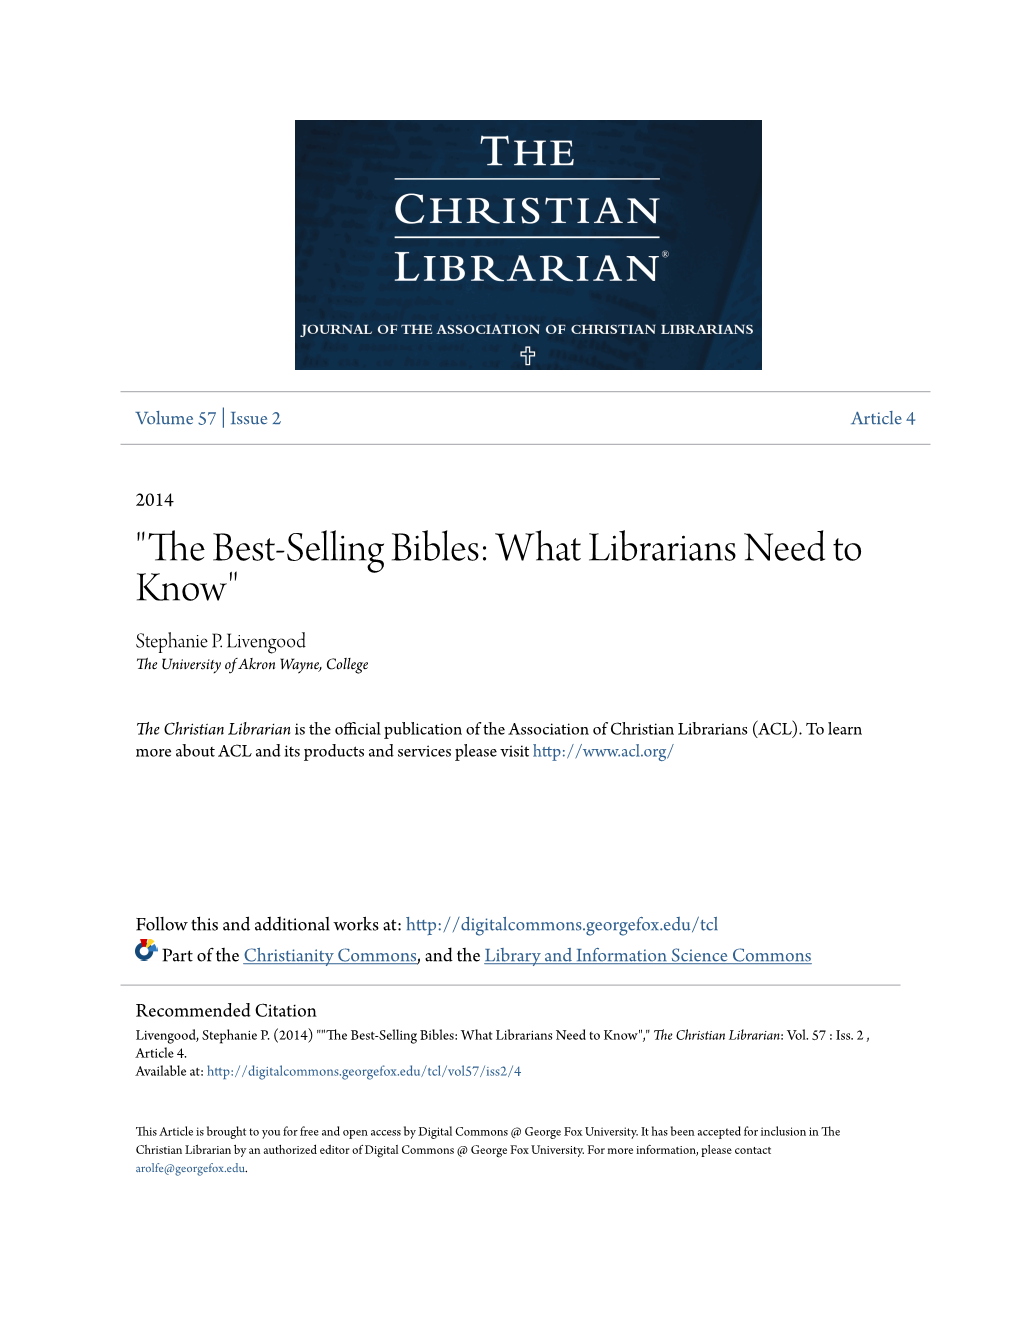 "The Best-Selling Bibles: What Librarians Need to Know" Stephanie P